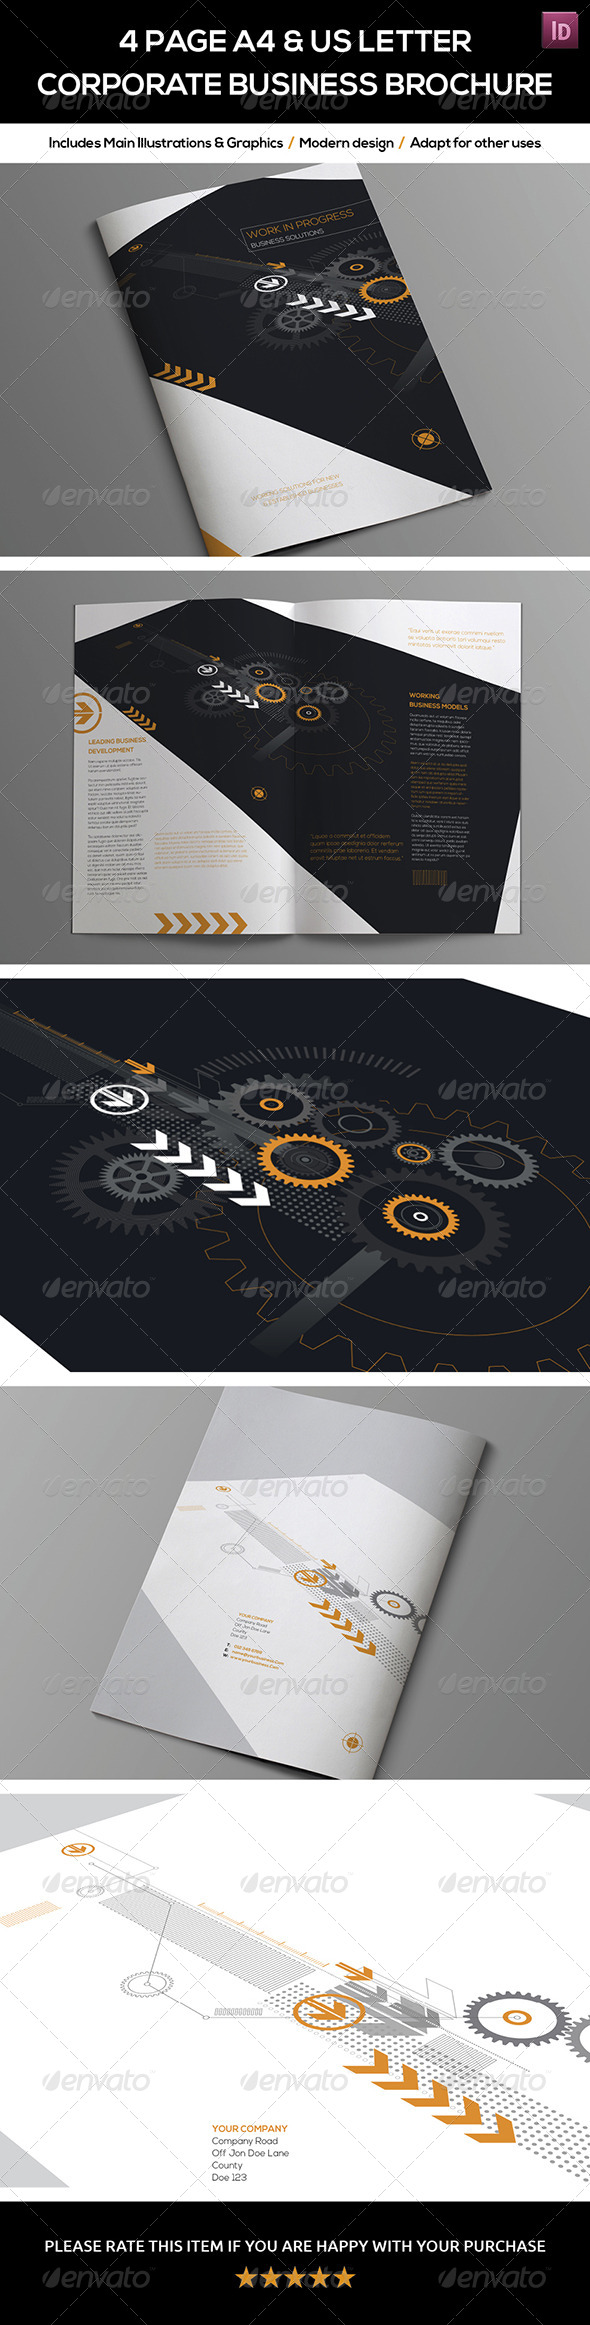 GraphicRiver 4 Page A4 and US Letter Company Brochure 7673182